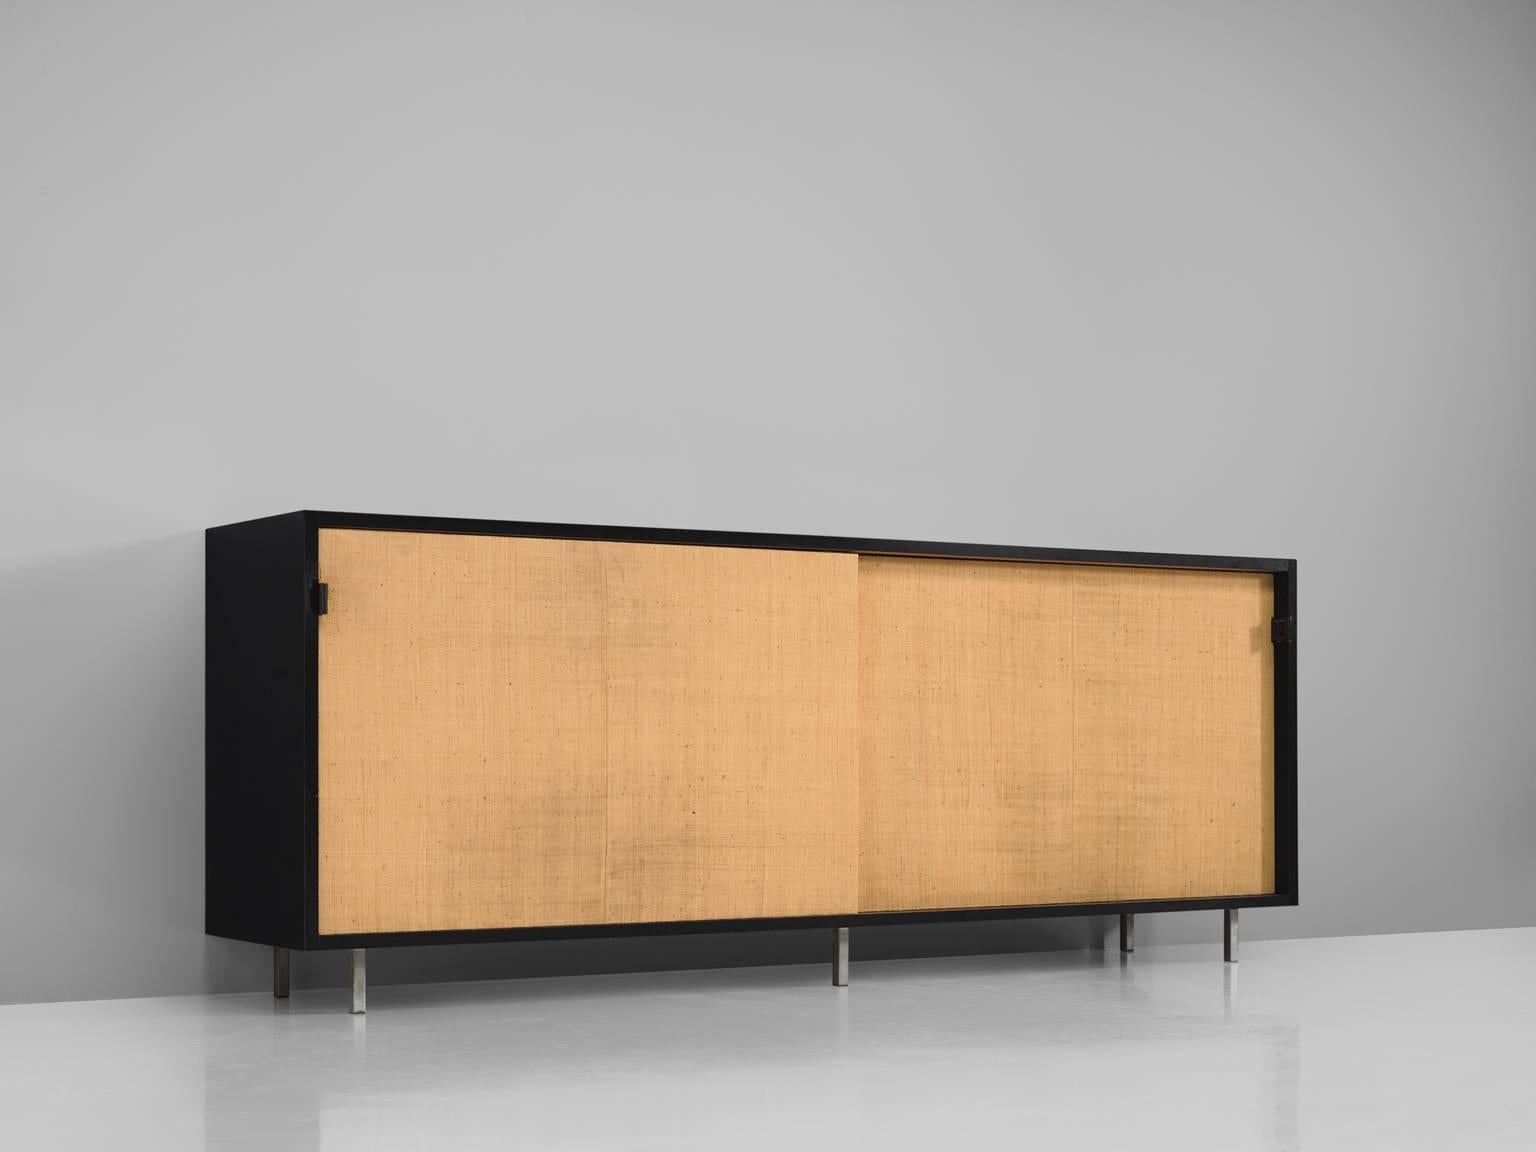 Florence knoll for knoll, cane, black ebonized wood, metal, cane, United States, 1961.

This sideboard is designed by Florence Knoll for Knoll International and was meant for the head office of a bank in Italy. The credenza is executed with two